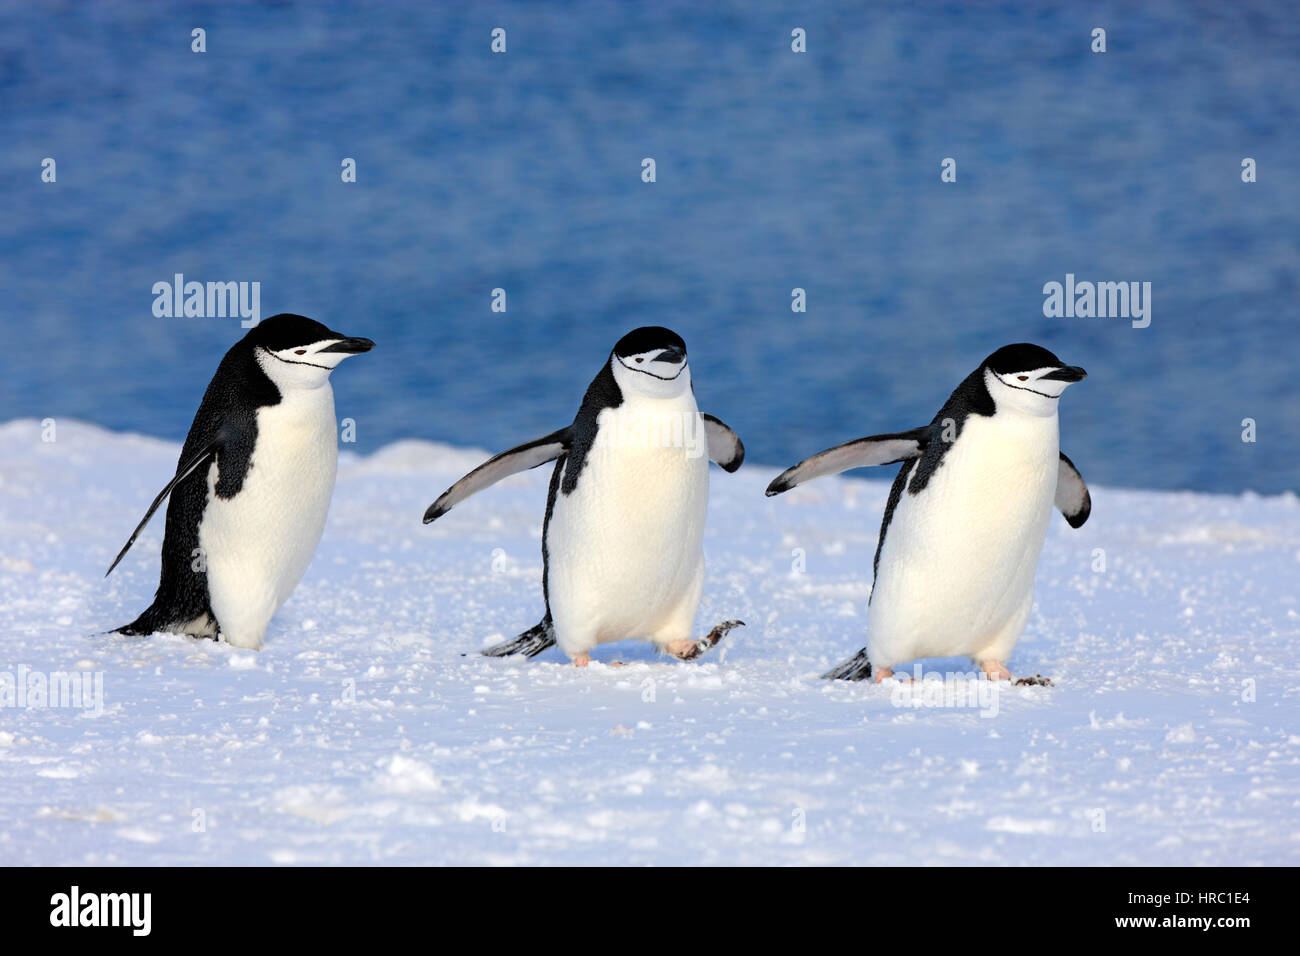 Chinstrap Penguin, (Pygoscelis antarctica), Antarctica, Brown Bluff, group of adults walking in snow Stock Photo